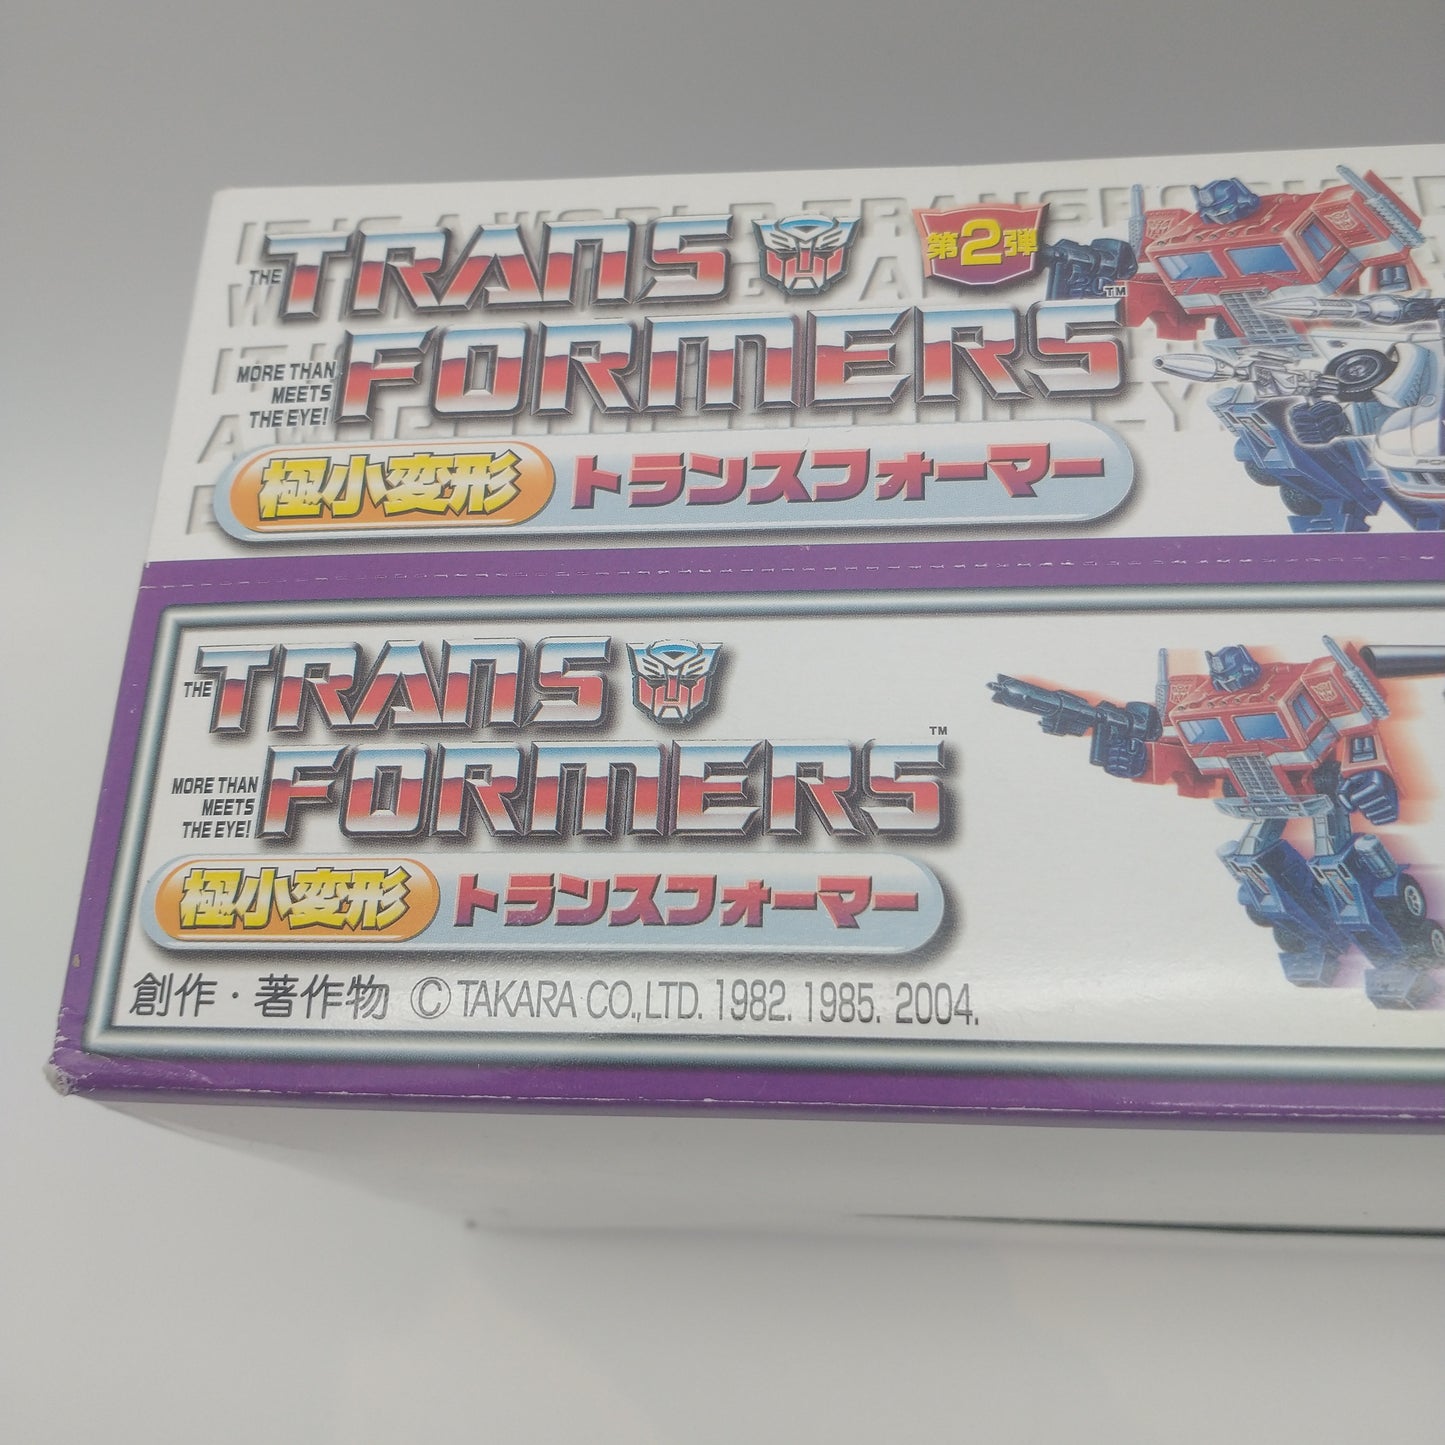 Worlds Smallest Transformers Figures Sealed Shipping/Display Box Takara 2004